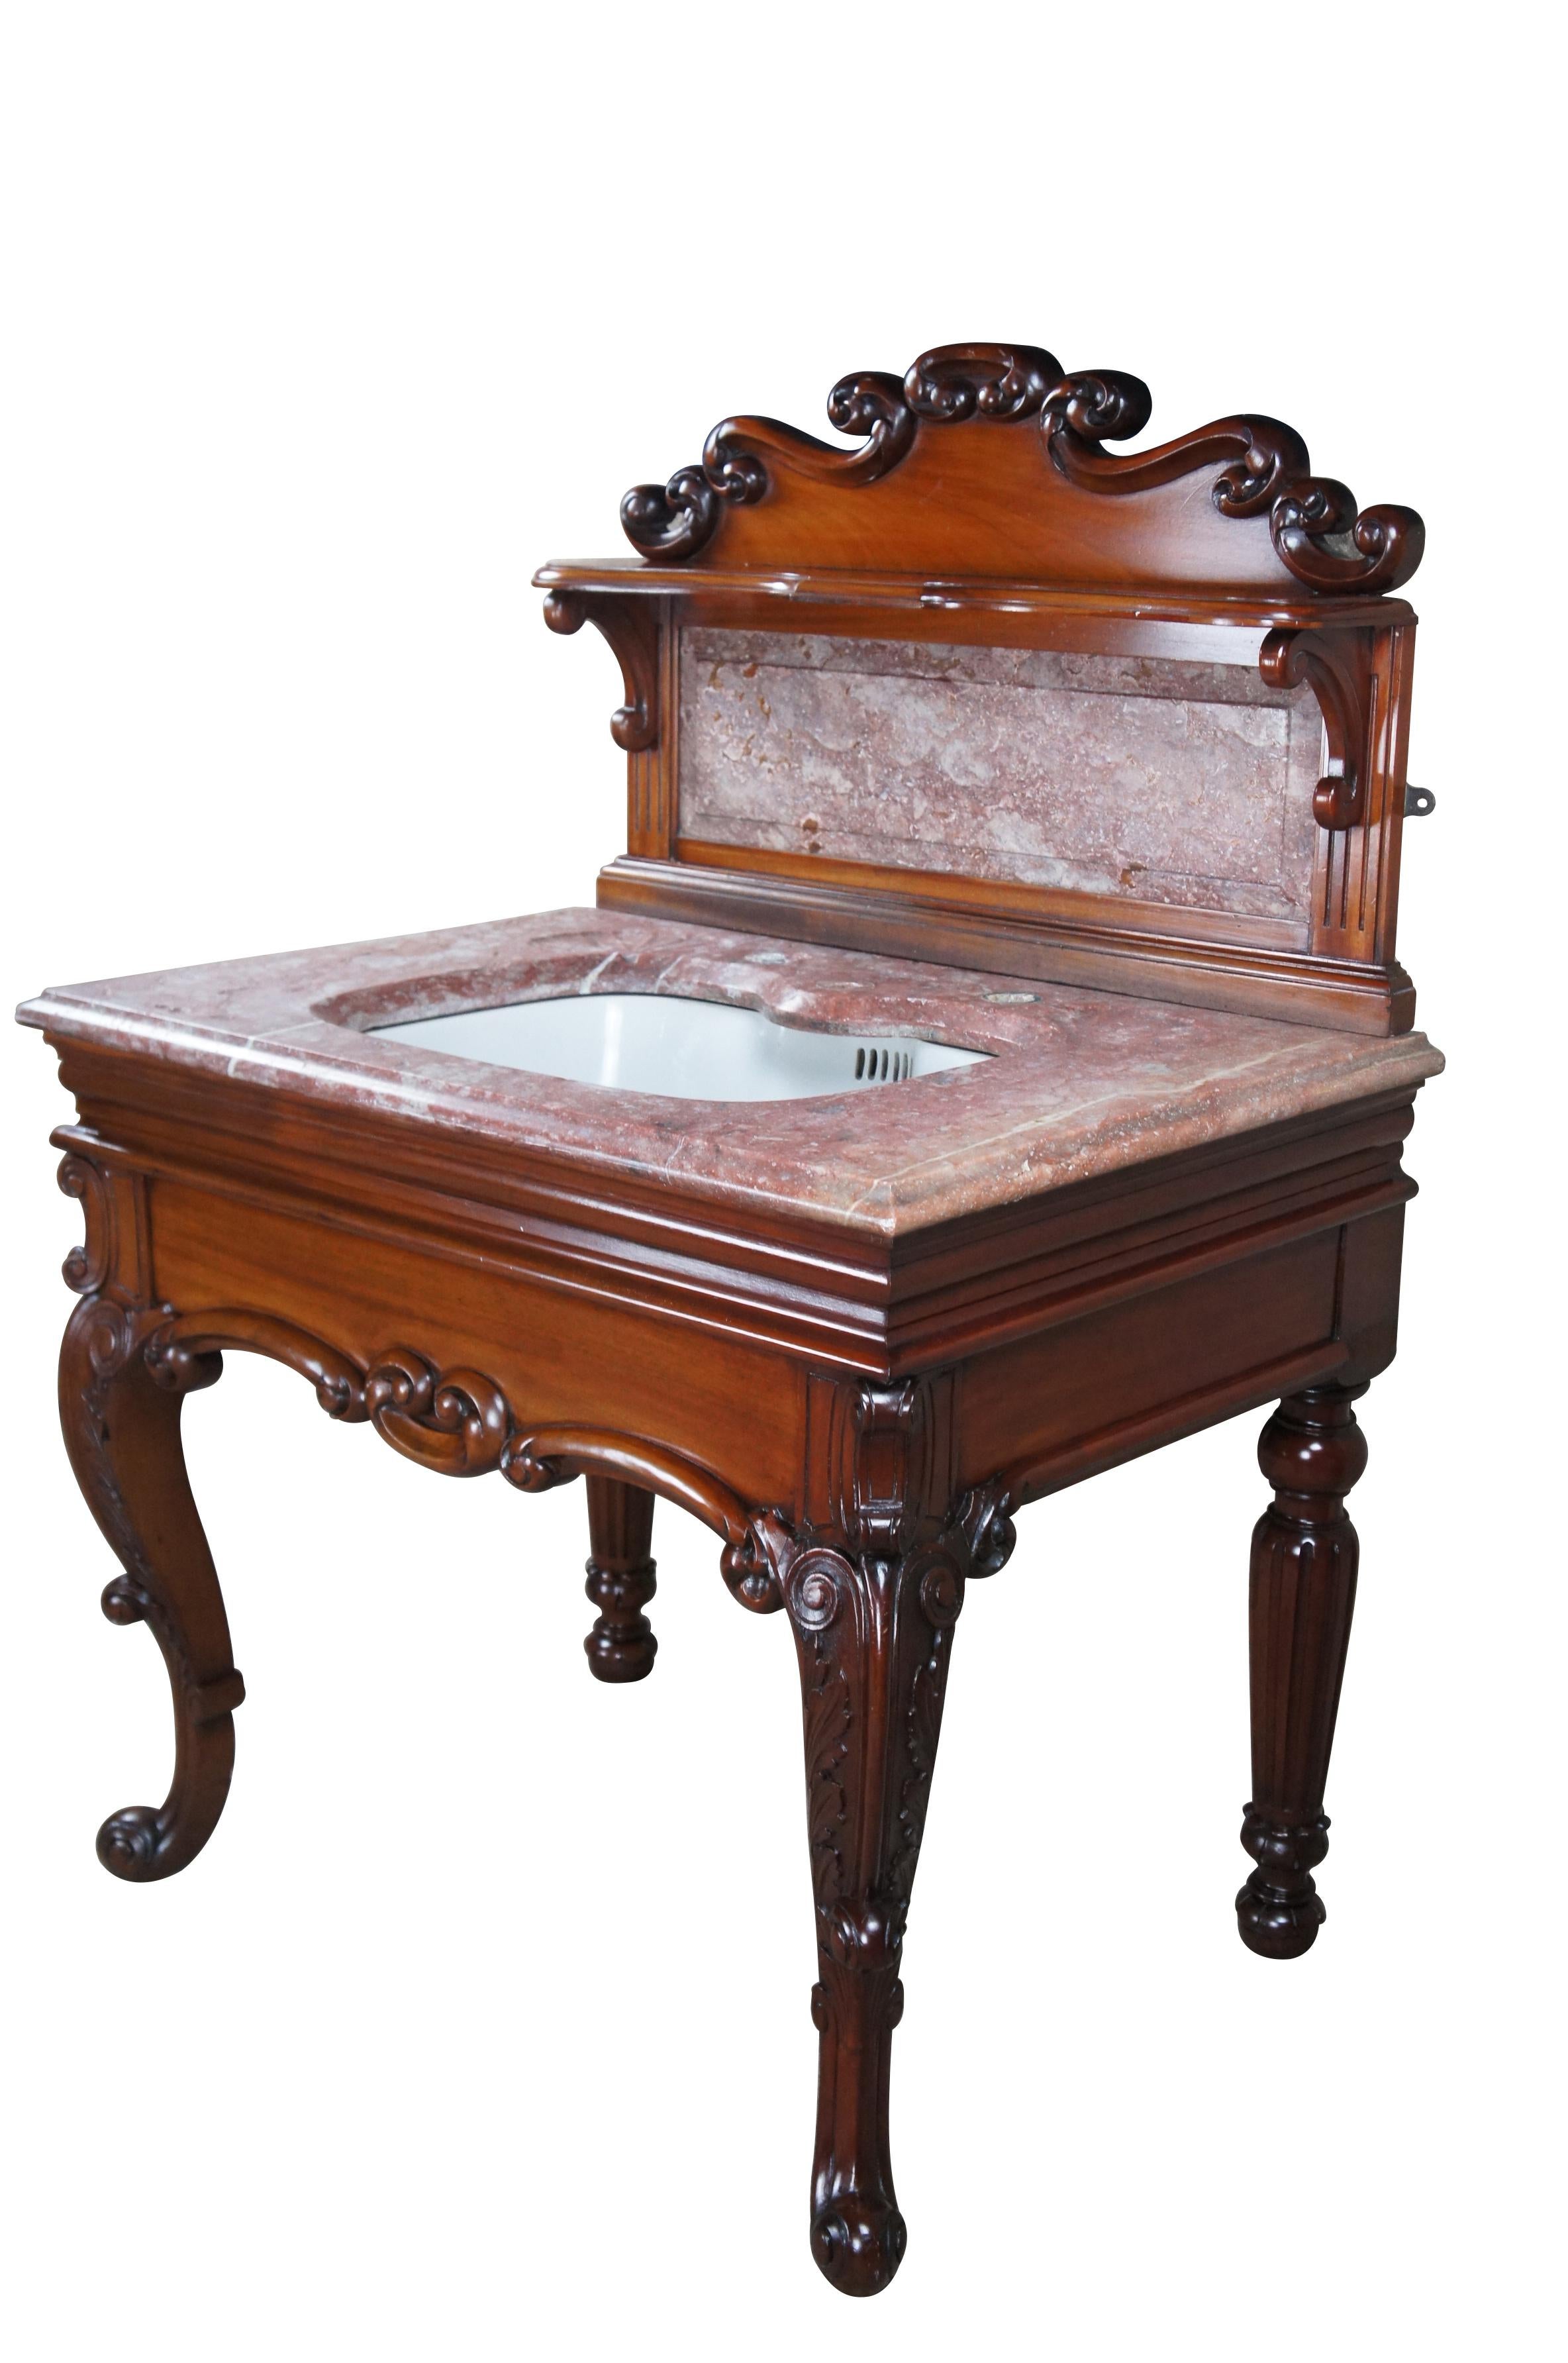 Rare Antique French Victorian Mahogany Marble Top Bathroom Vanity Porcelain Sink In Good Condition For Sale In Dayton, OH